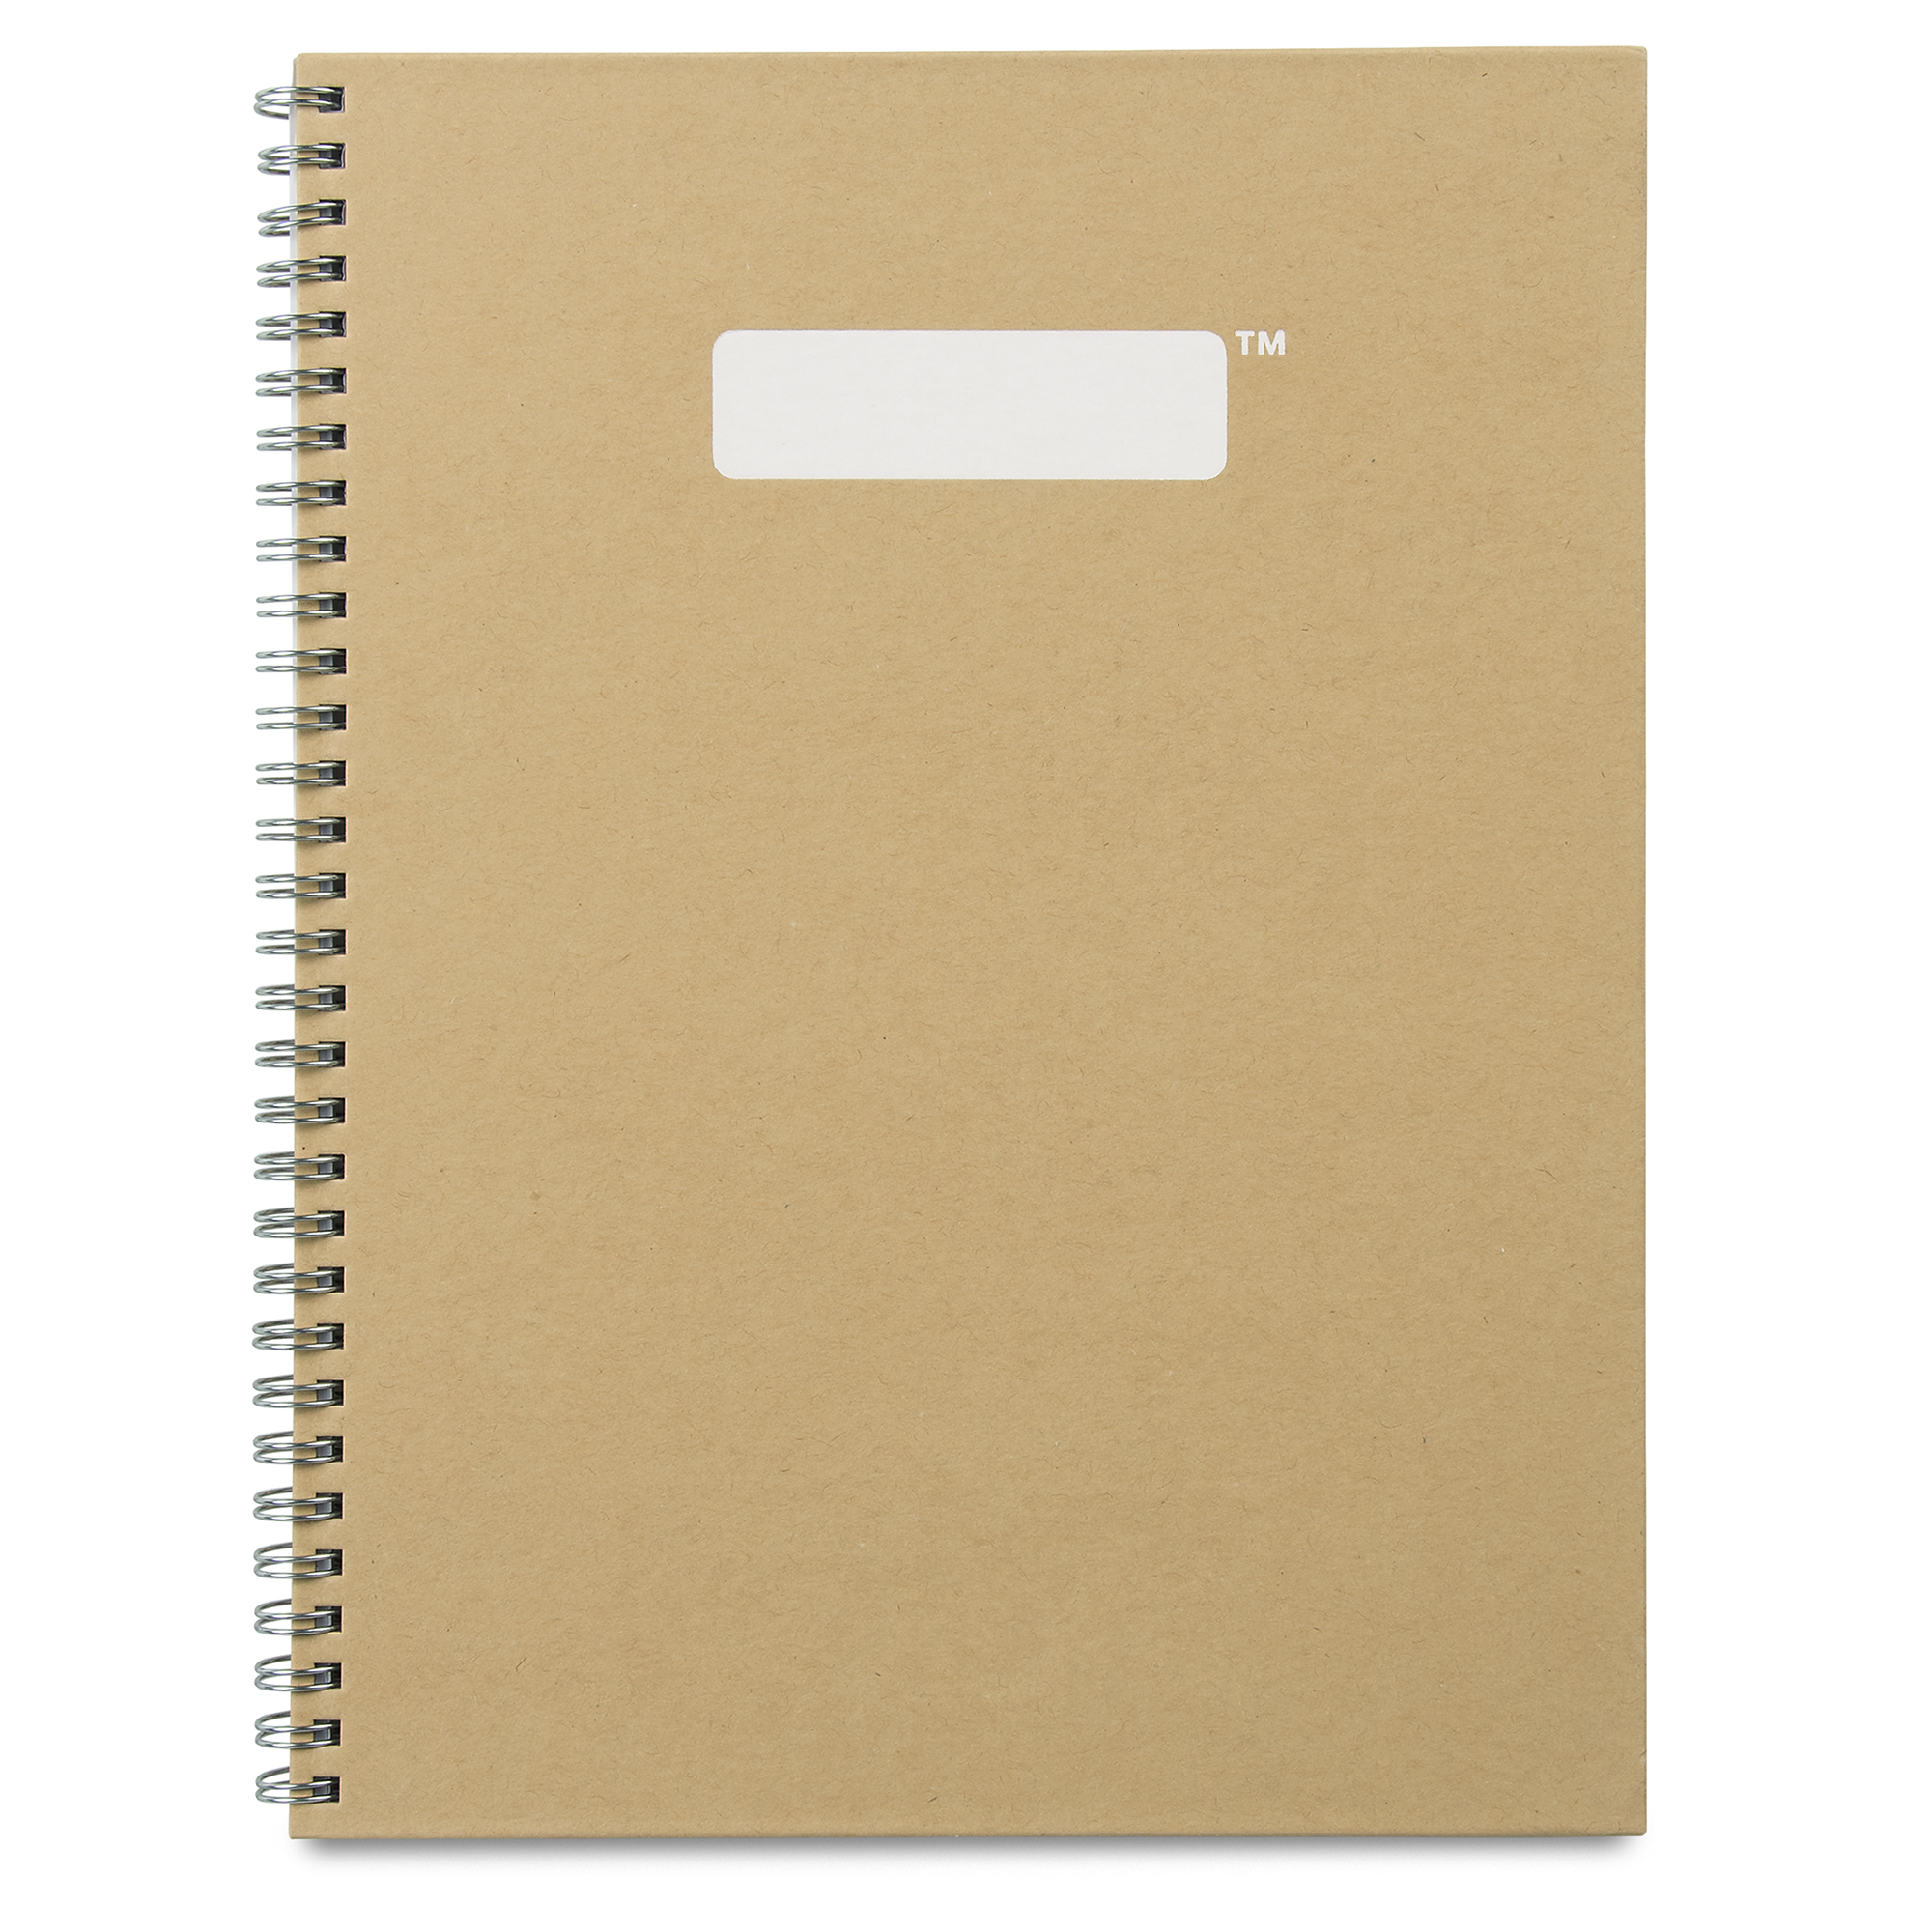 Hardcover spiral notebook.  FSC certified paper. College ruled. 80 perforated pages. Brandless. Craft Cover.